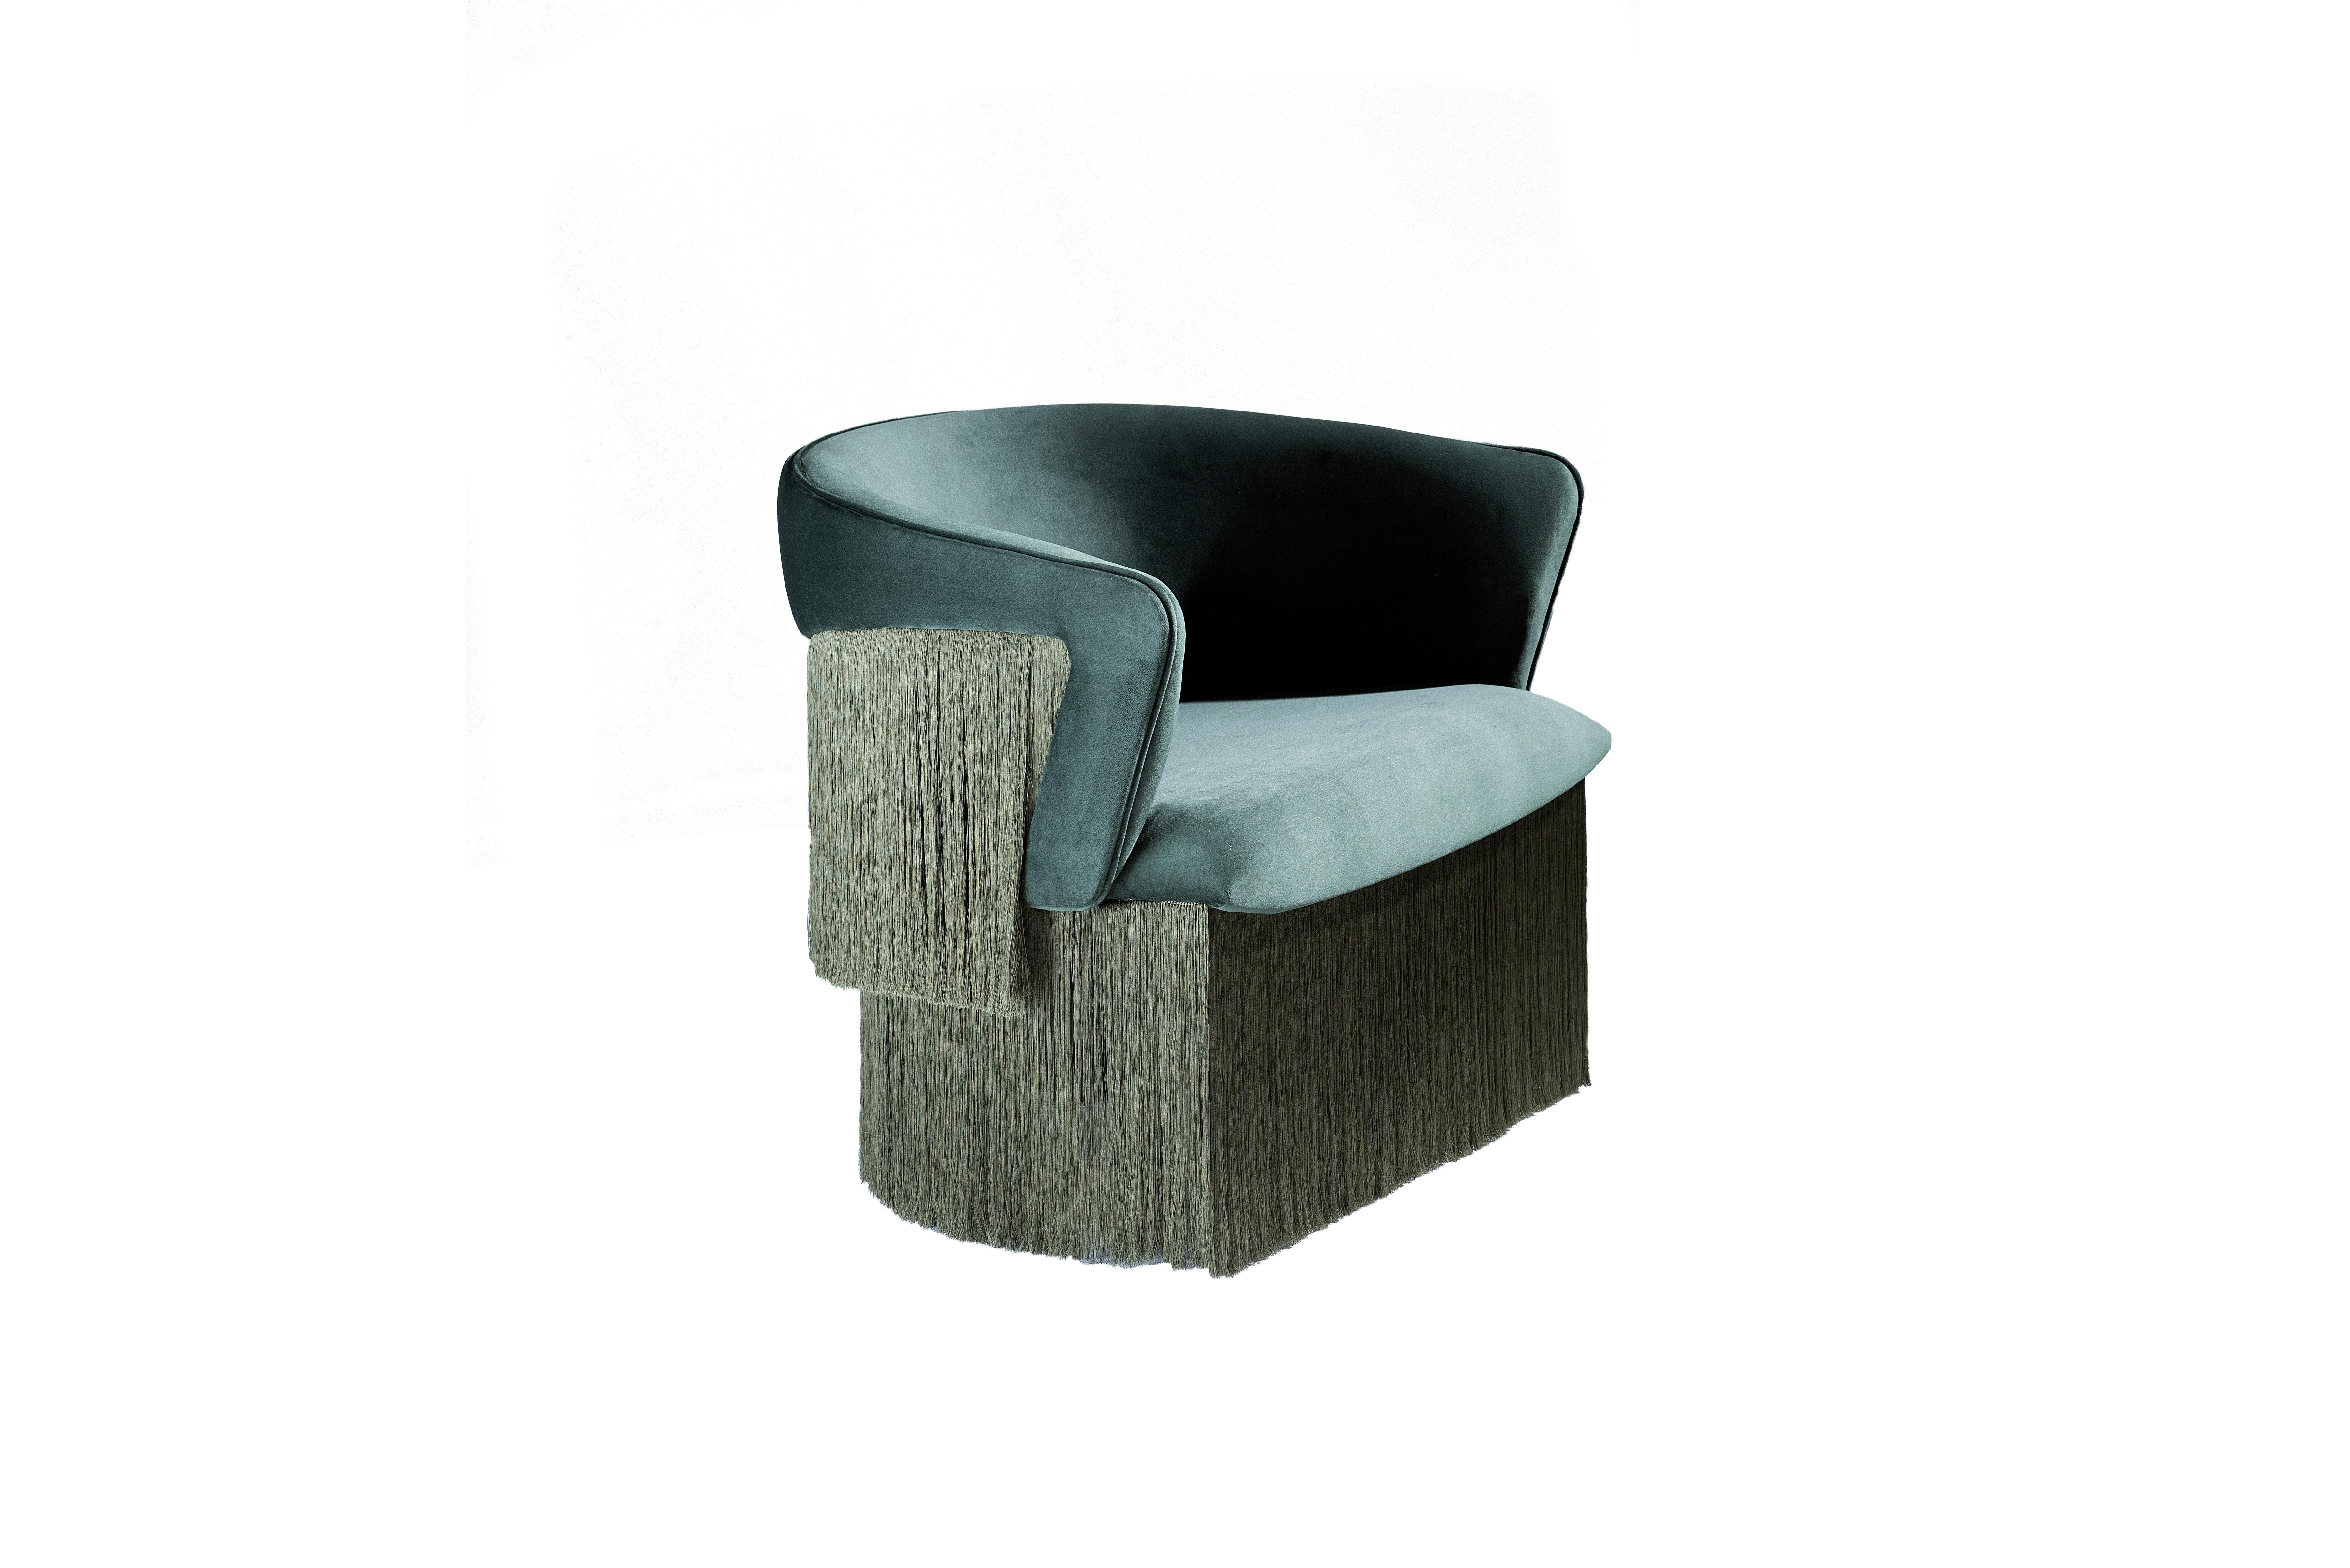 The wind swivel armchair is elegantly upholstered in velvet: Green, black, or offwhite colors options.

The breeze is identified with the lightness and freshness of the feeling of the skin, of the wind, in its constant movement. Thus came the